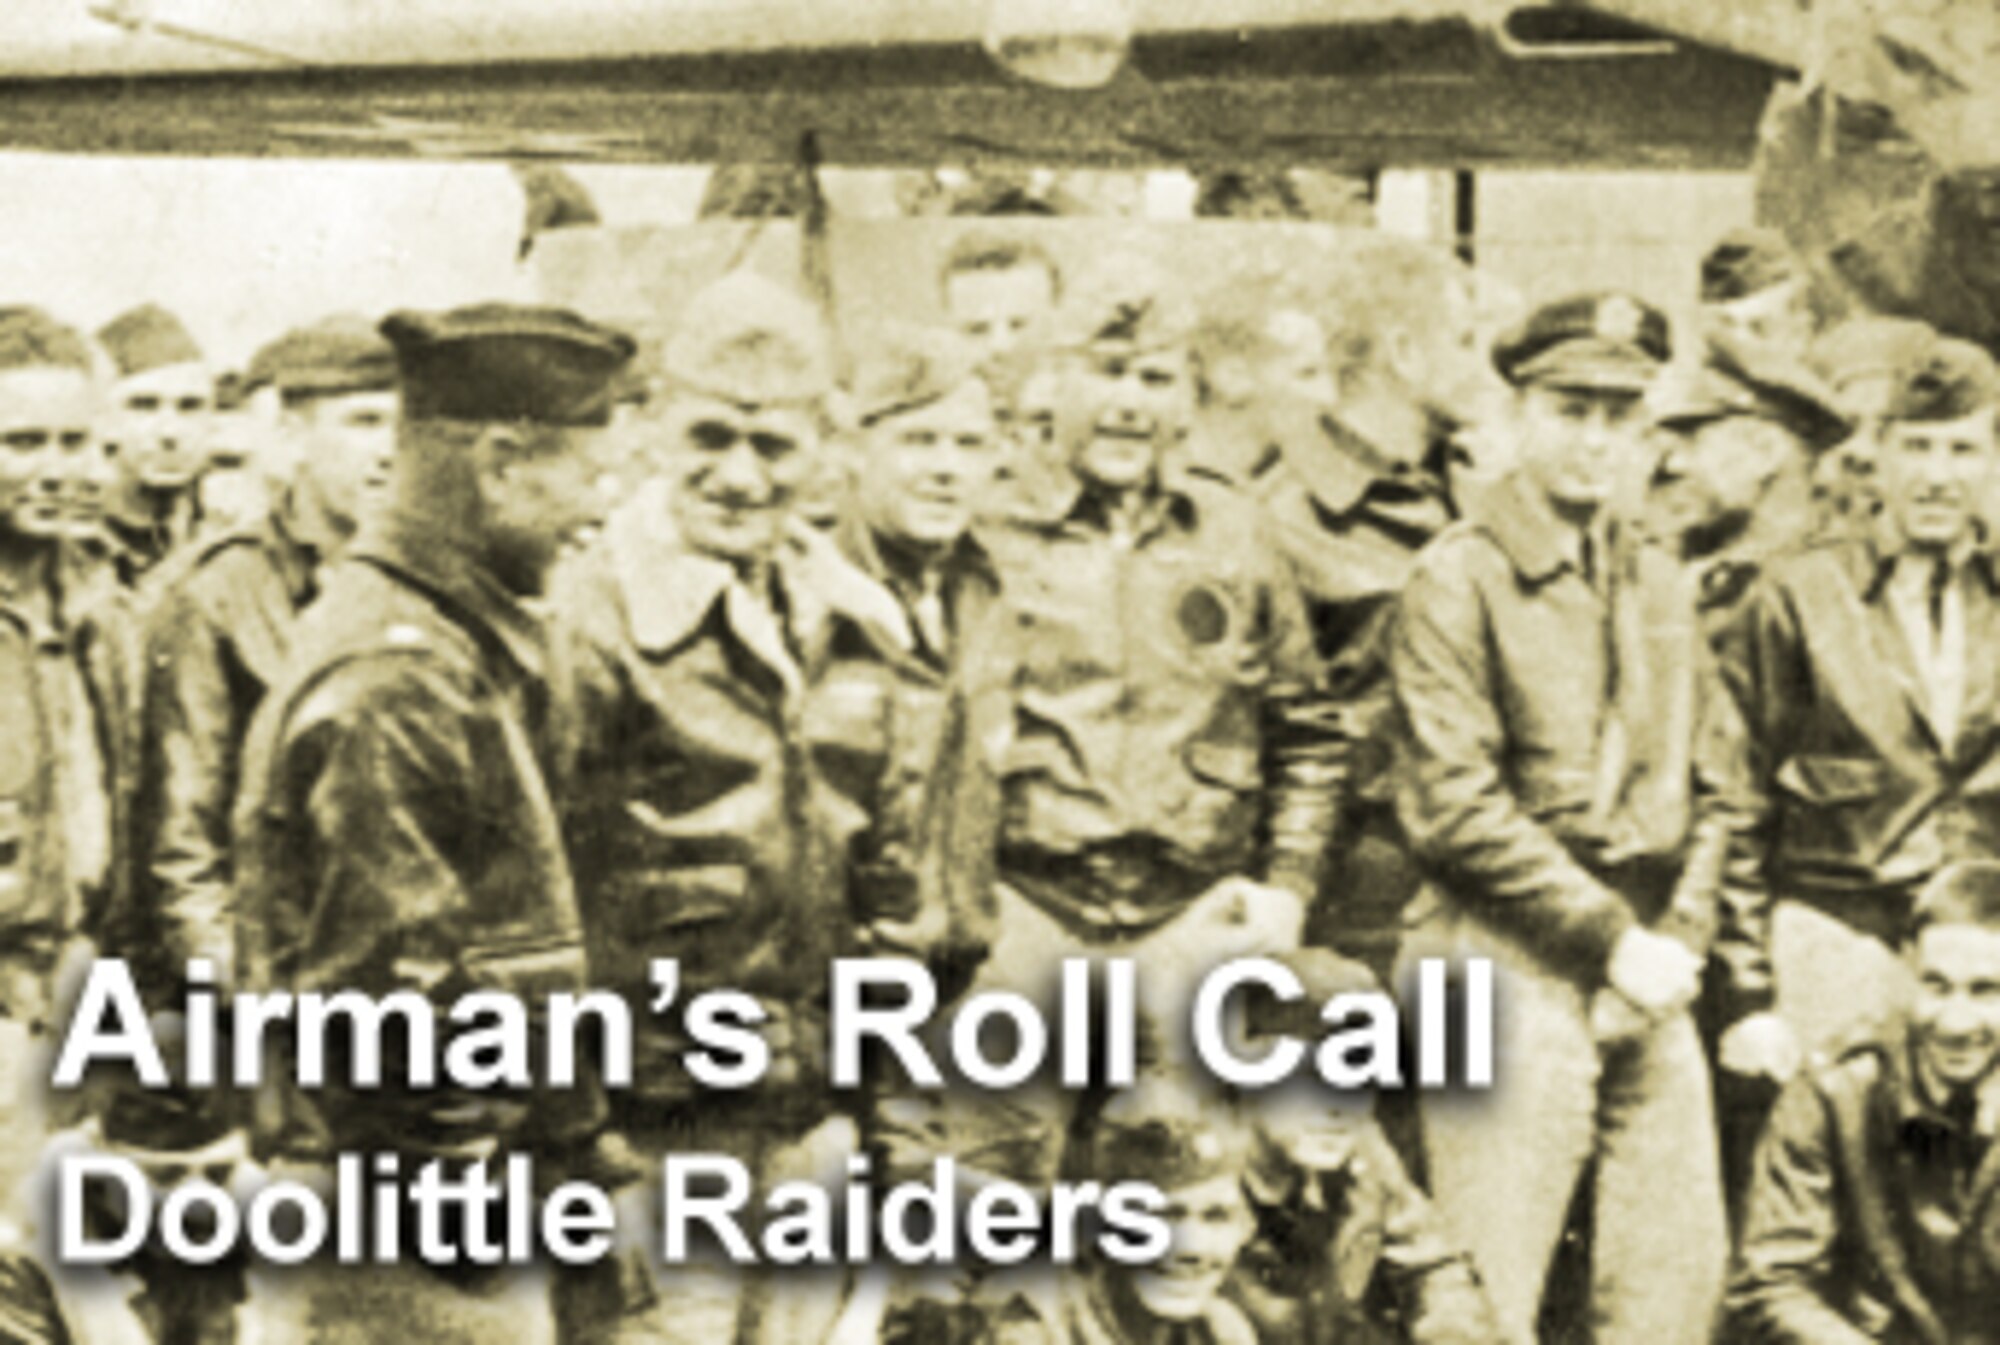 The latest Airman's Roll Call highlights the Doolittle Raiders, who are reuniting in San Antonio April 17 to 20 to remember the 65th anniversary of their historic flight. (U.S. Air Force graphic/Mike Carabajal)